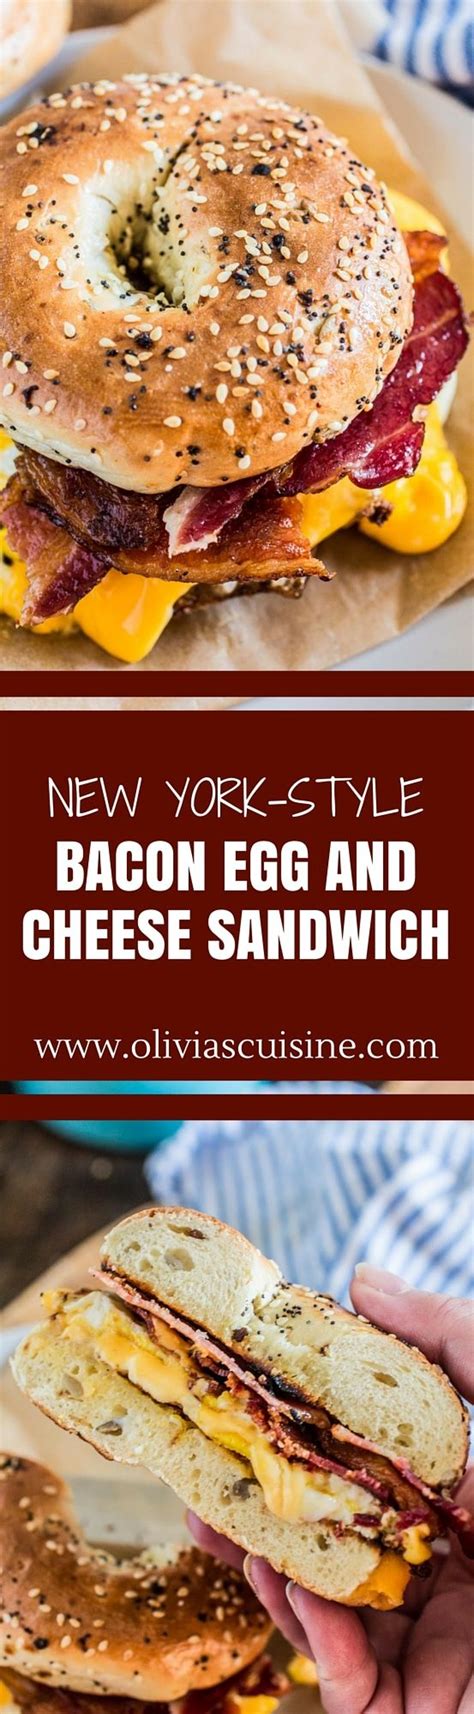 New York Style Bacon Egg And Cheese Olivias Cuisine Bacon Egg And